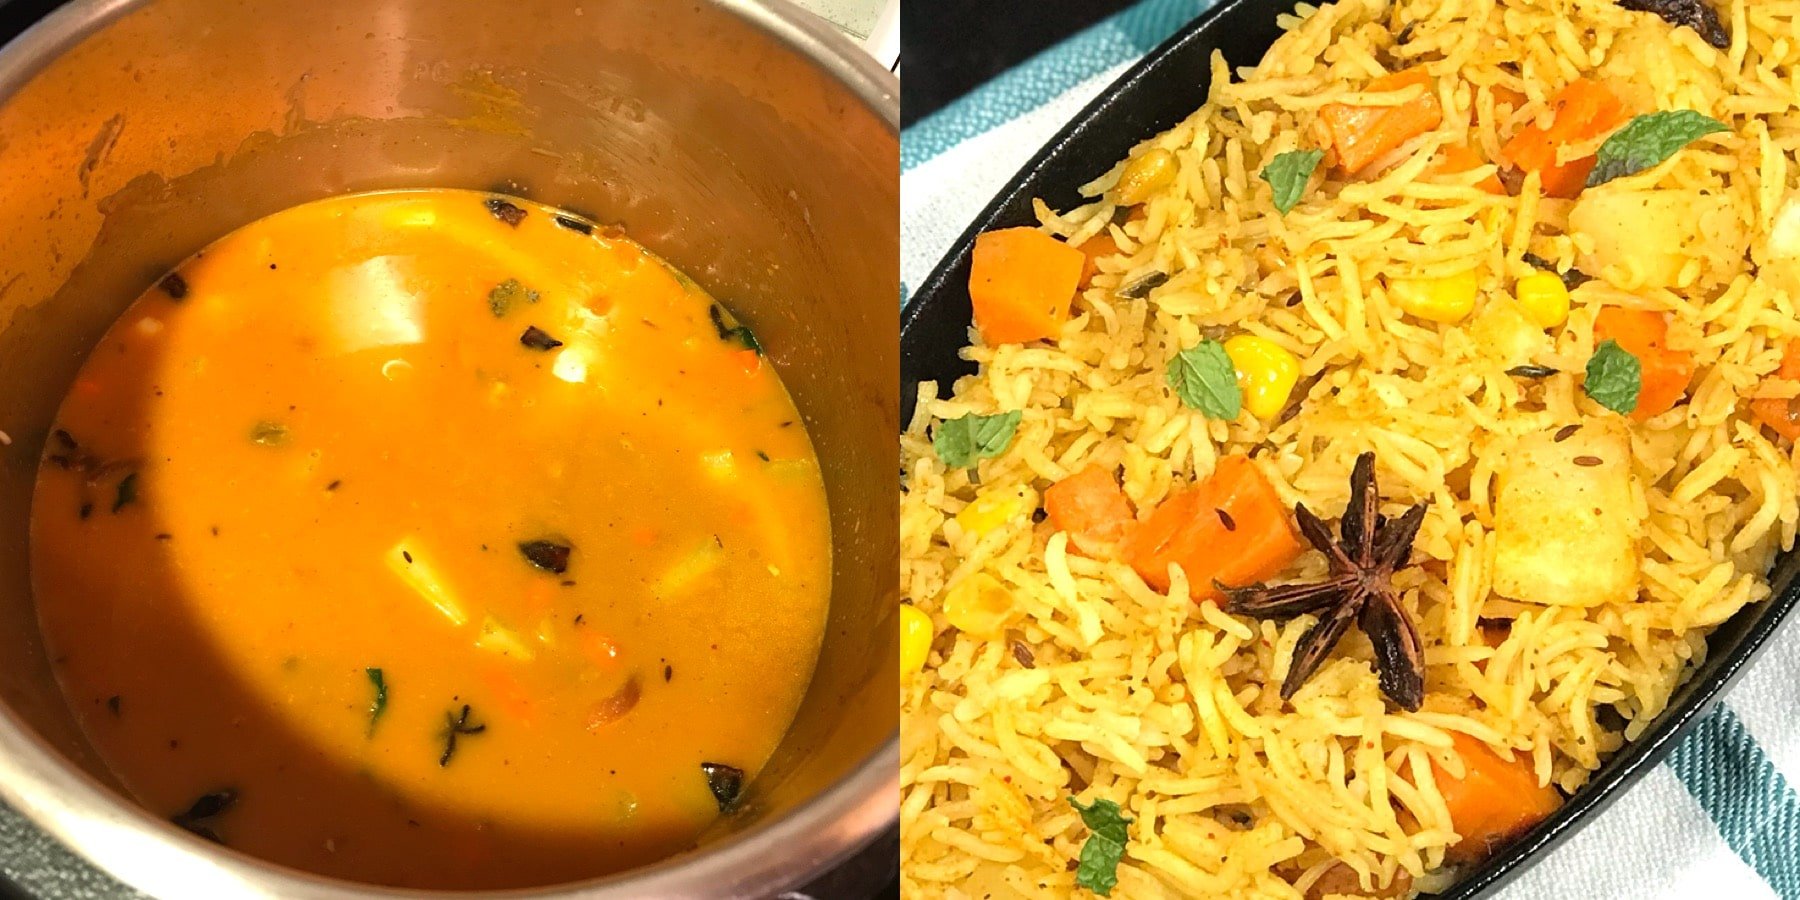 An instant pot filled with rice and vegetables with Biryani